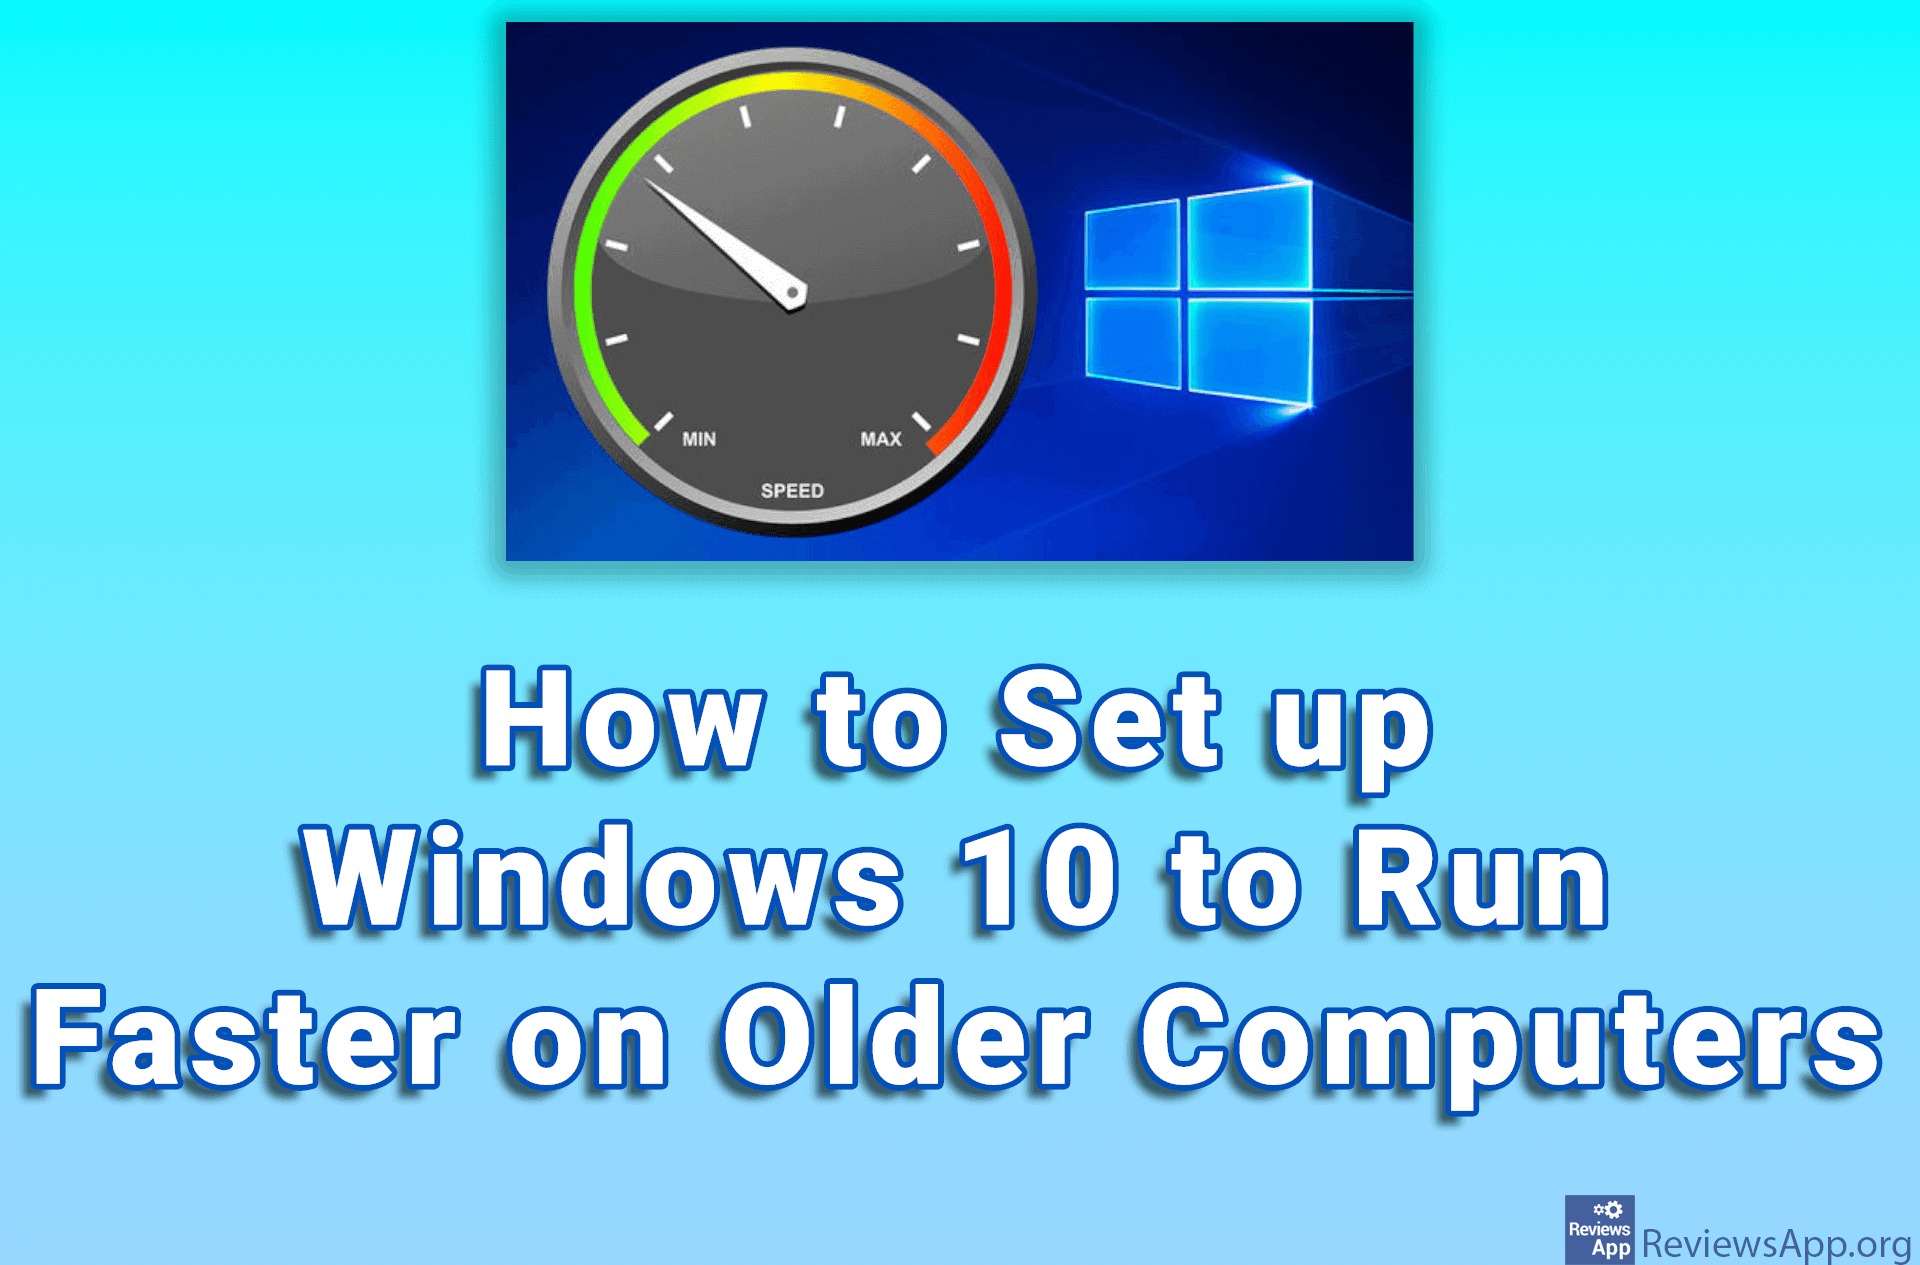 How to Set up Windows 10 to Run Faster on Older Computers